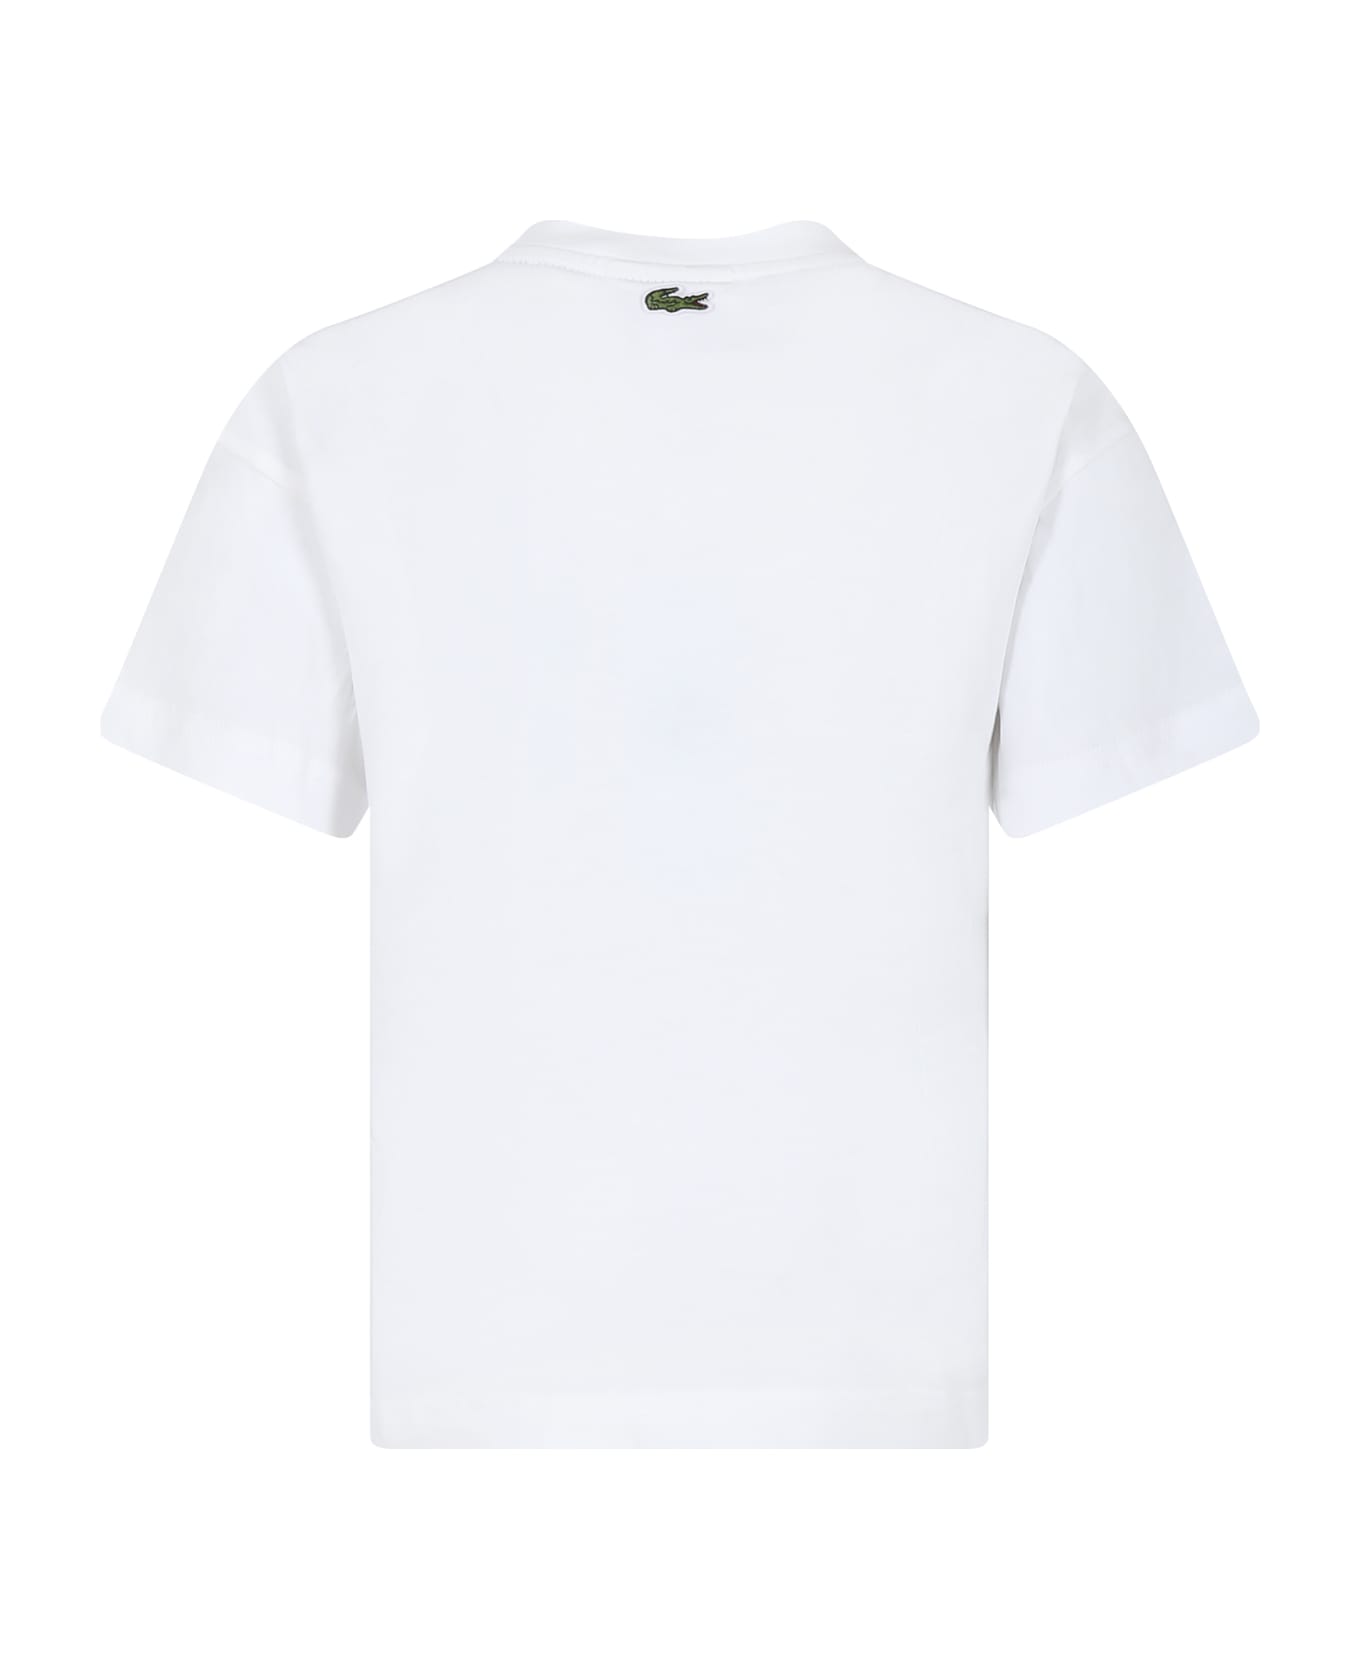 Lacoste White T-shirt For Boy With Crocodile - White